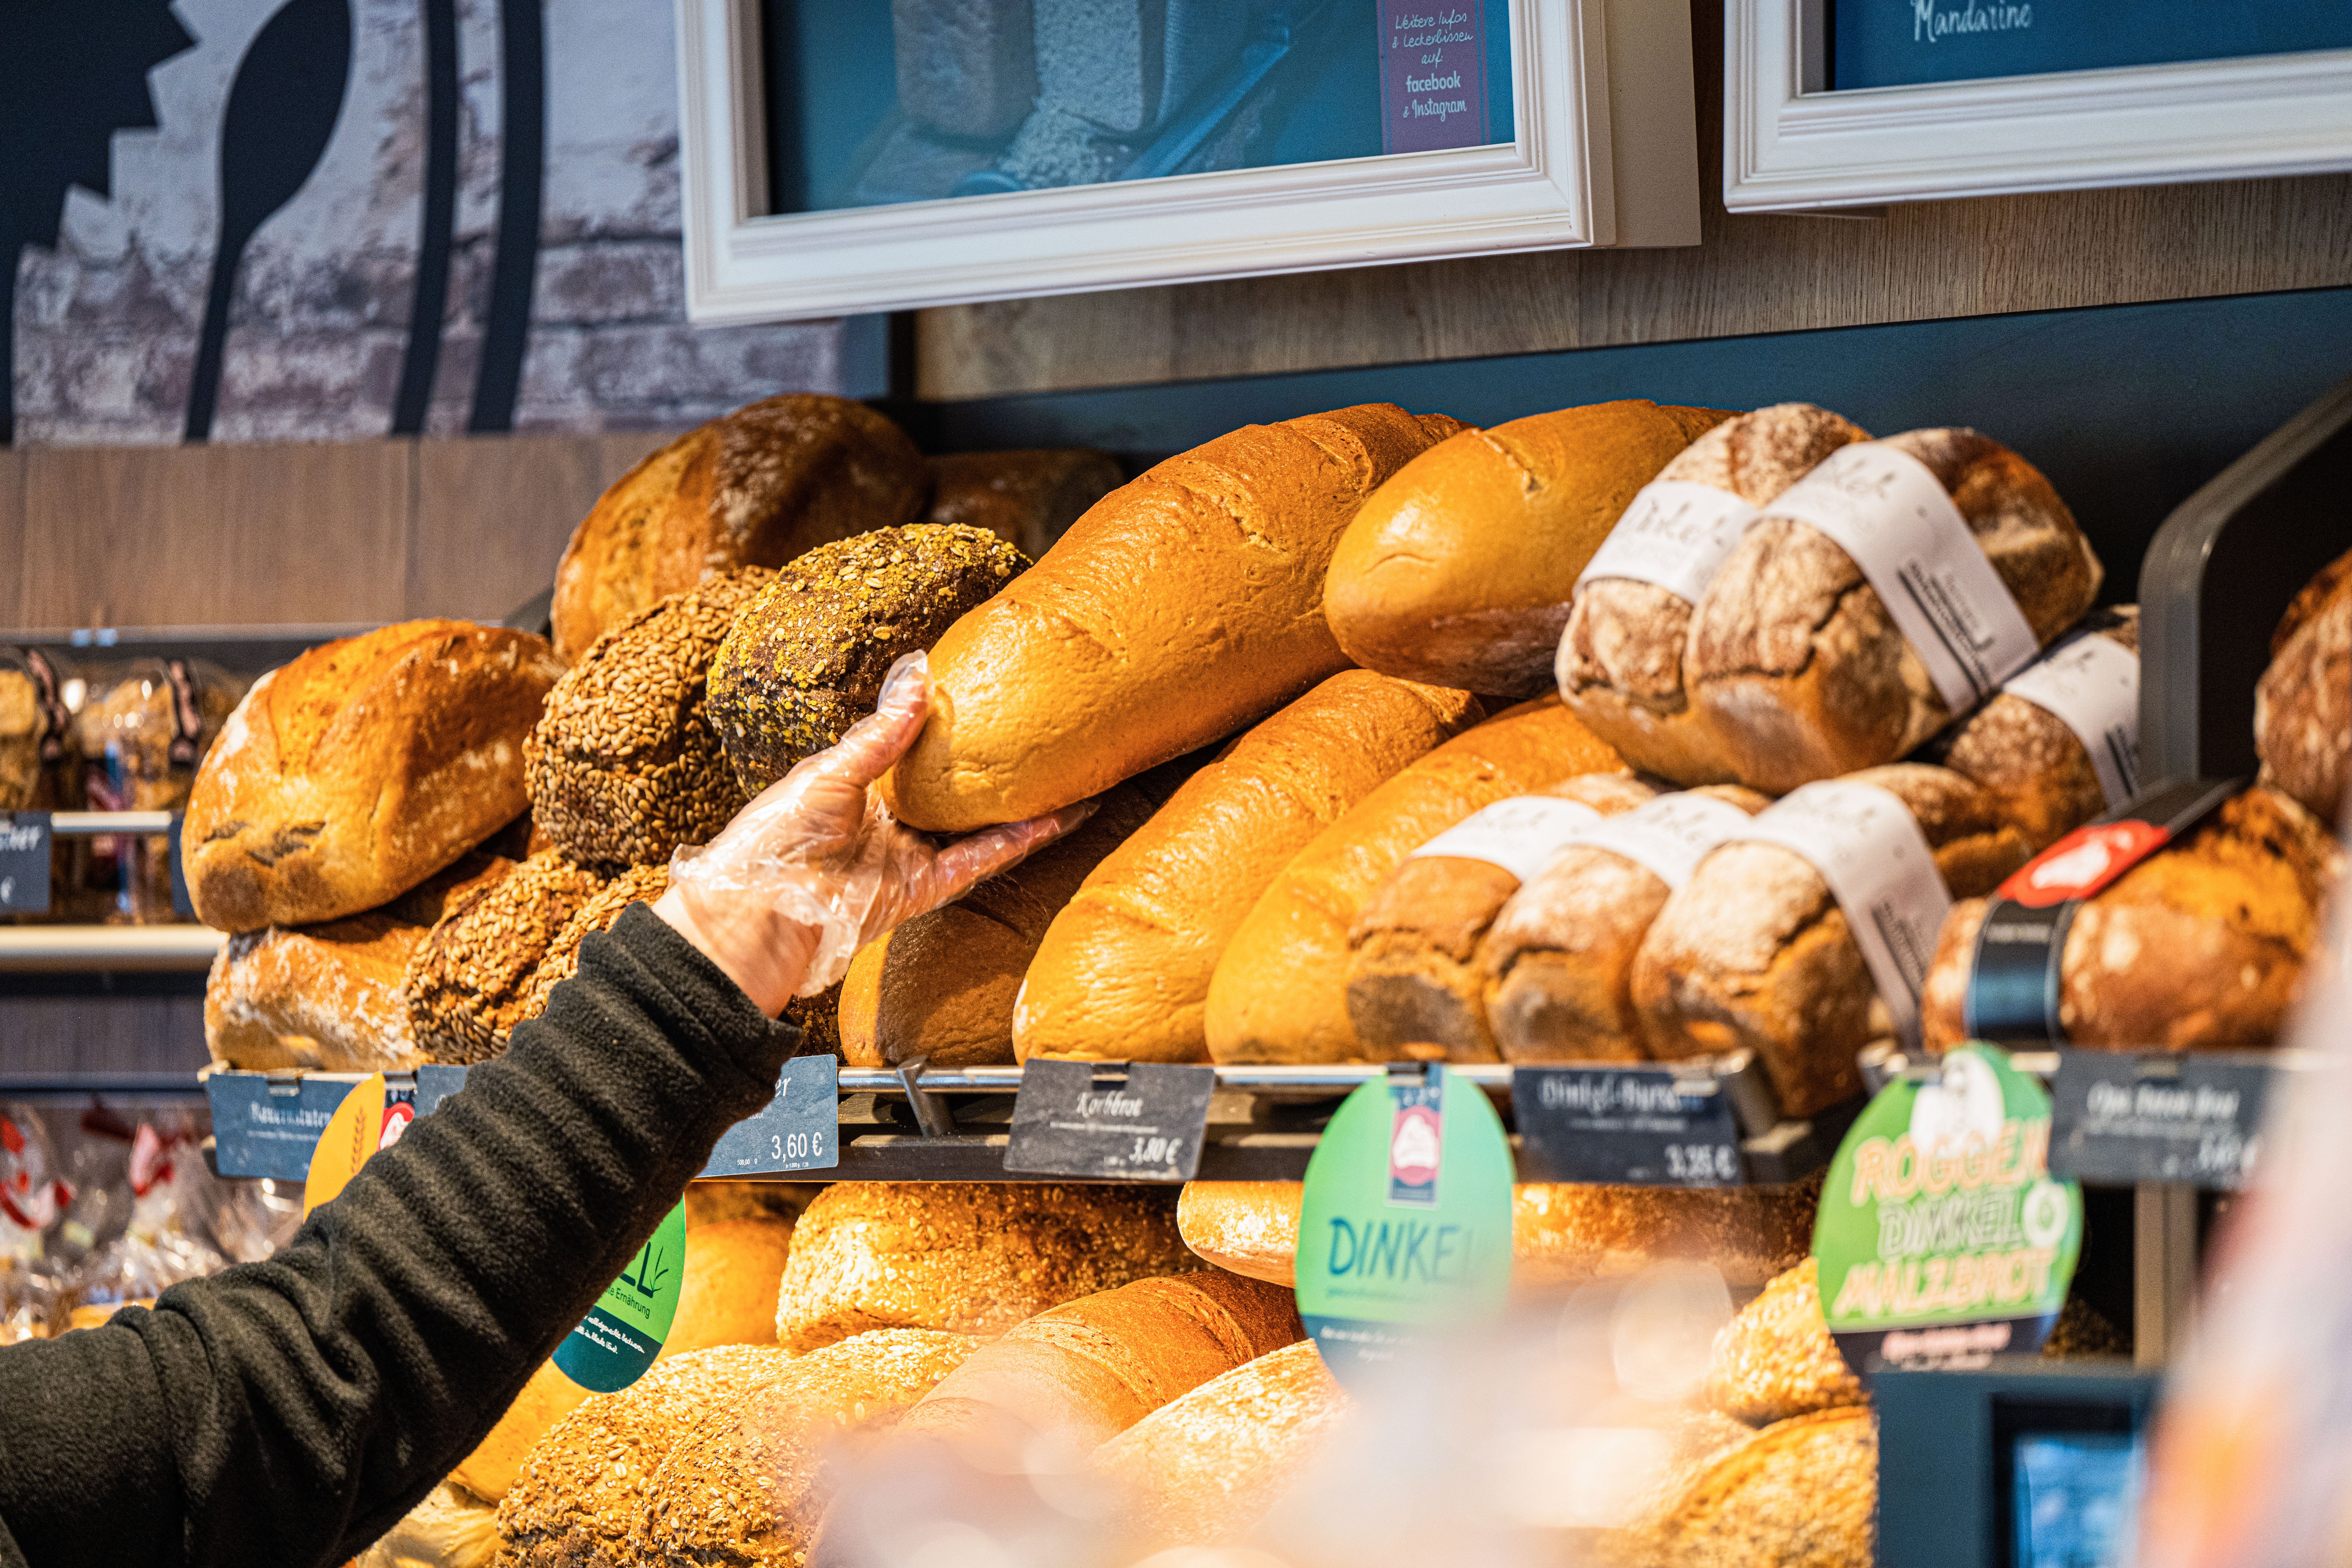 A saleswoman reaches for a loaf of bread in a bakery.